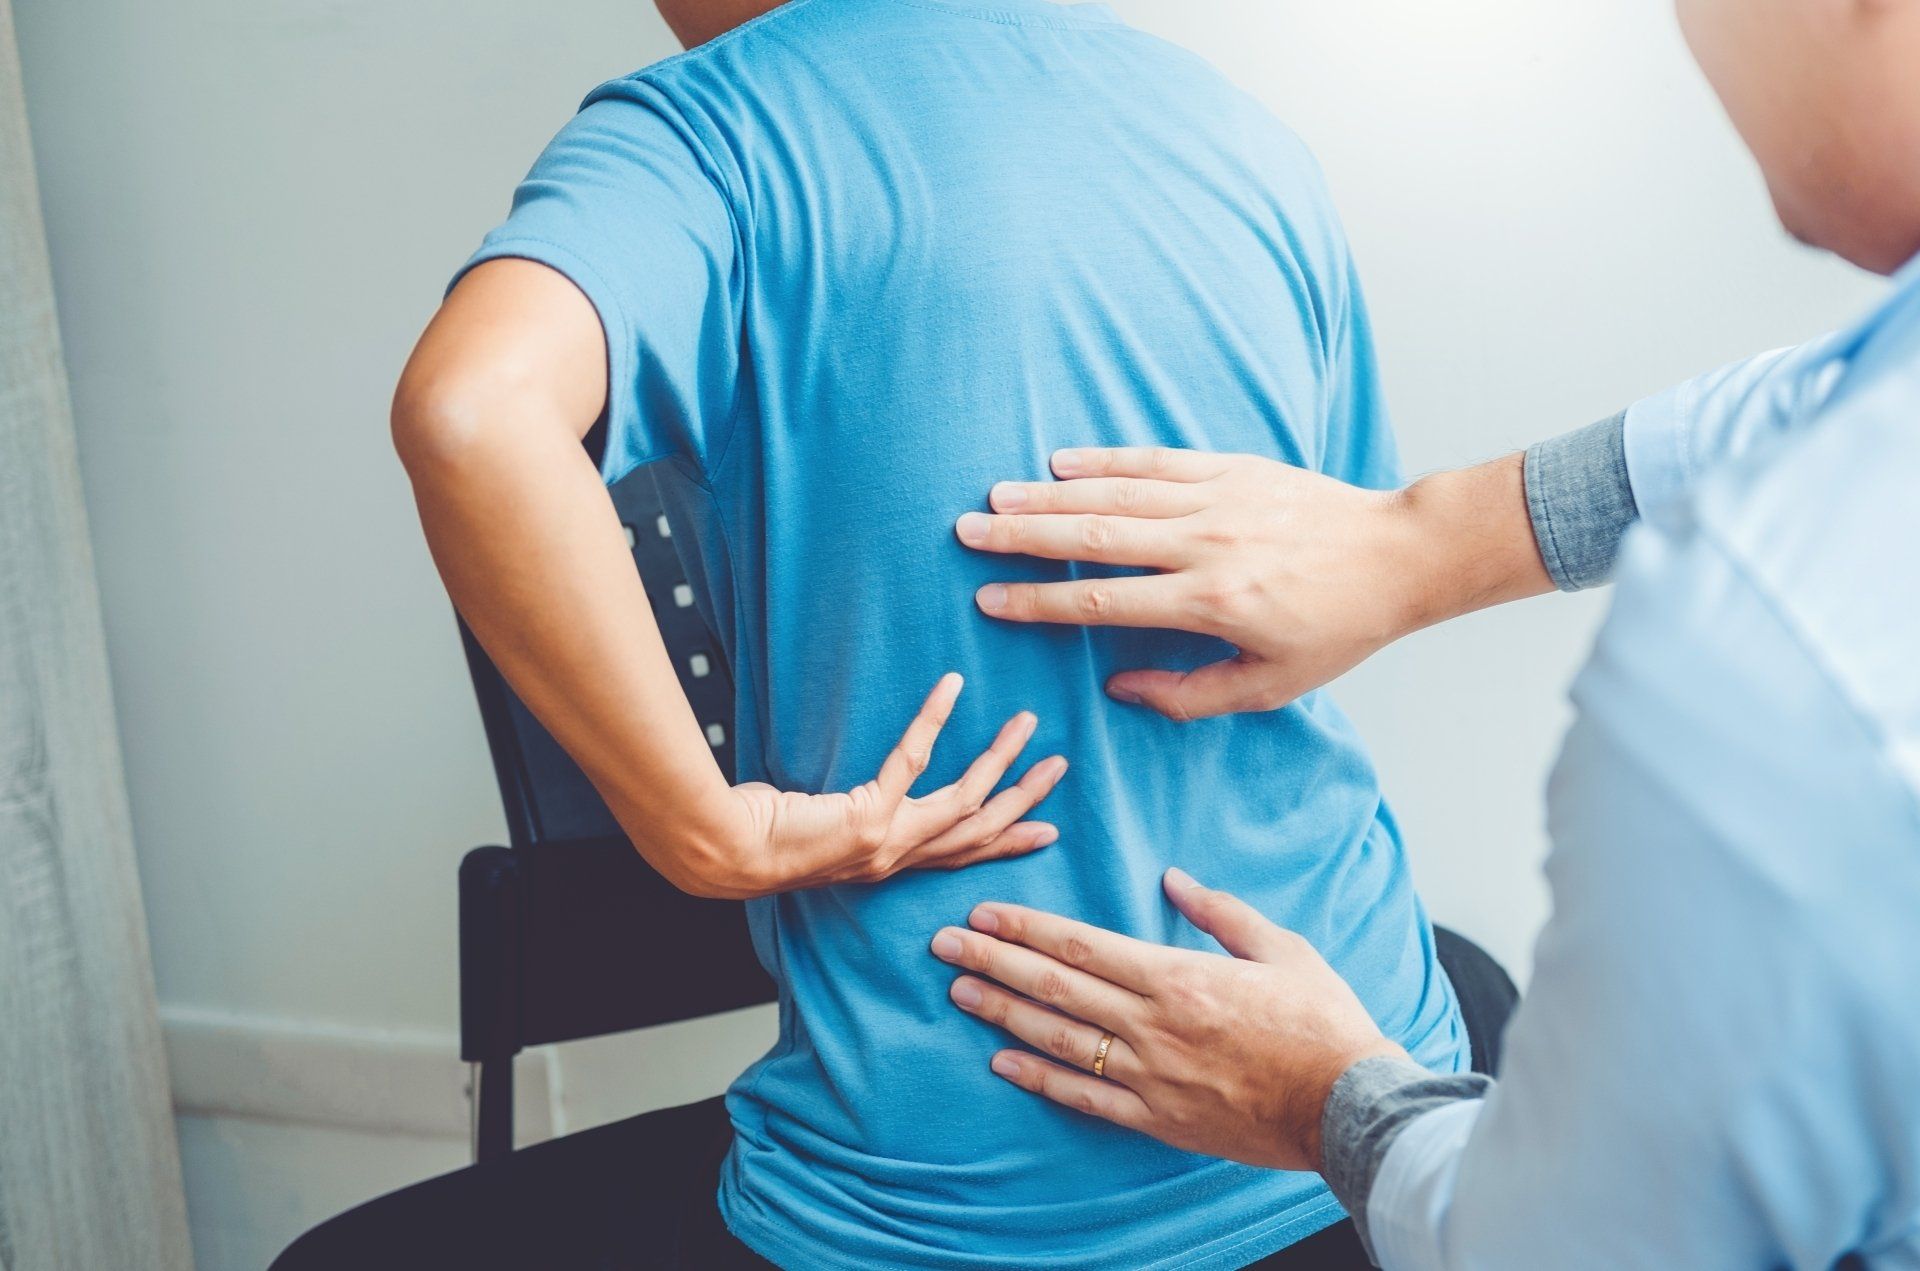 chiropractic care services